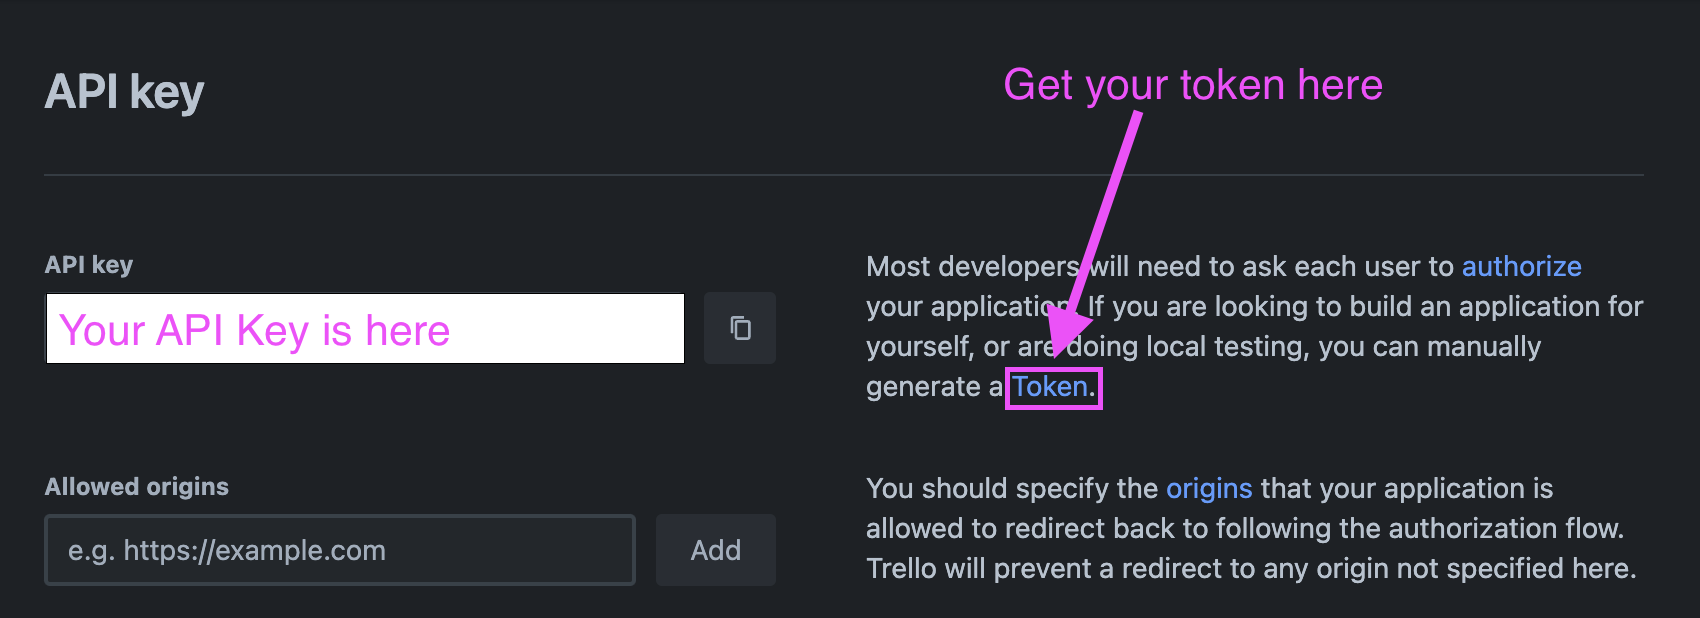 Copy your API key from the field and click the token link to generate your token